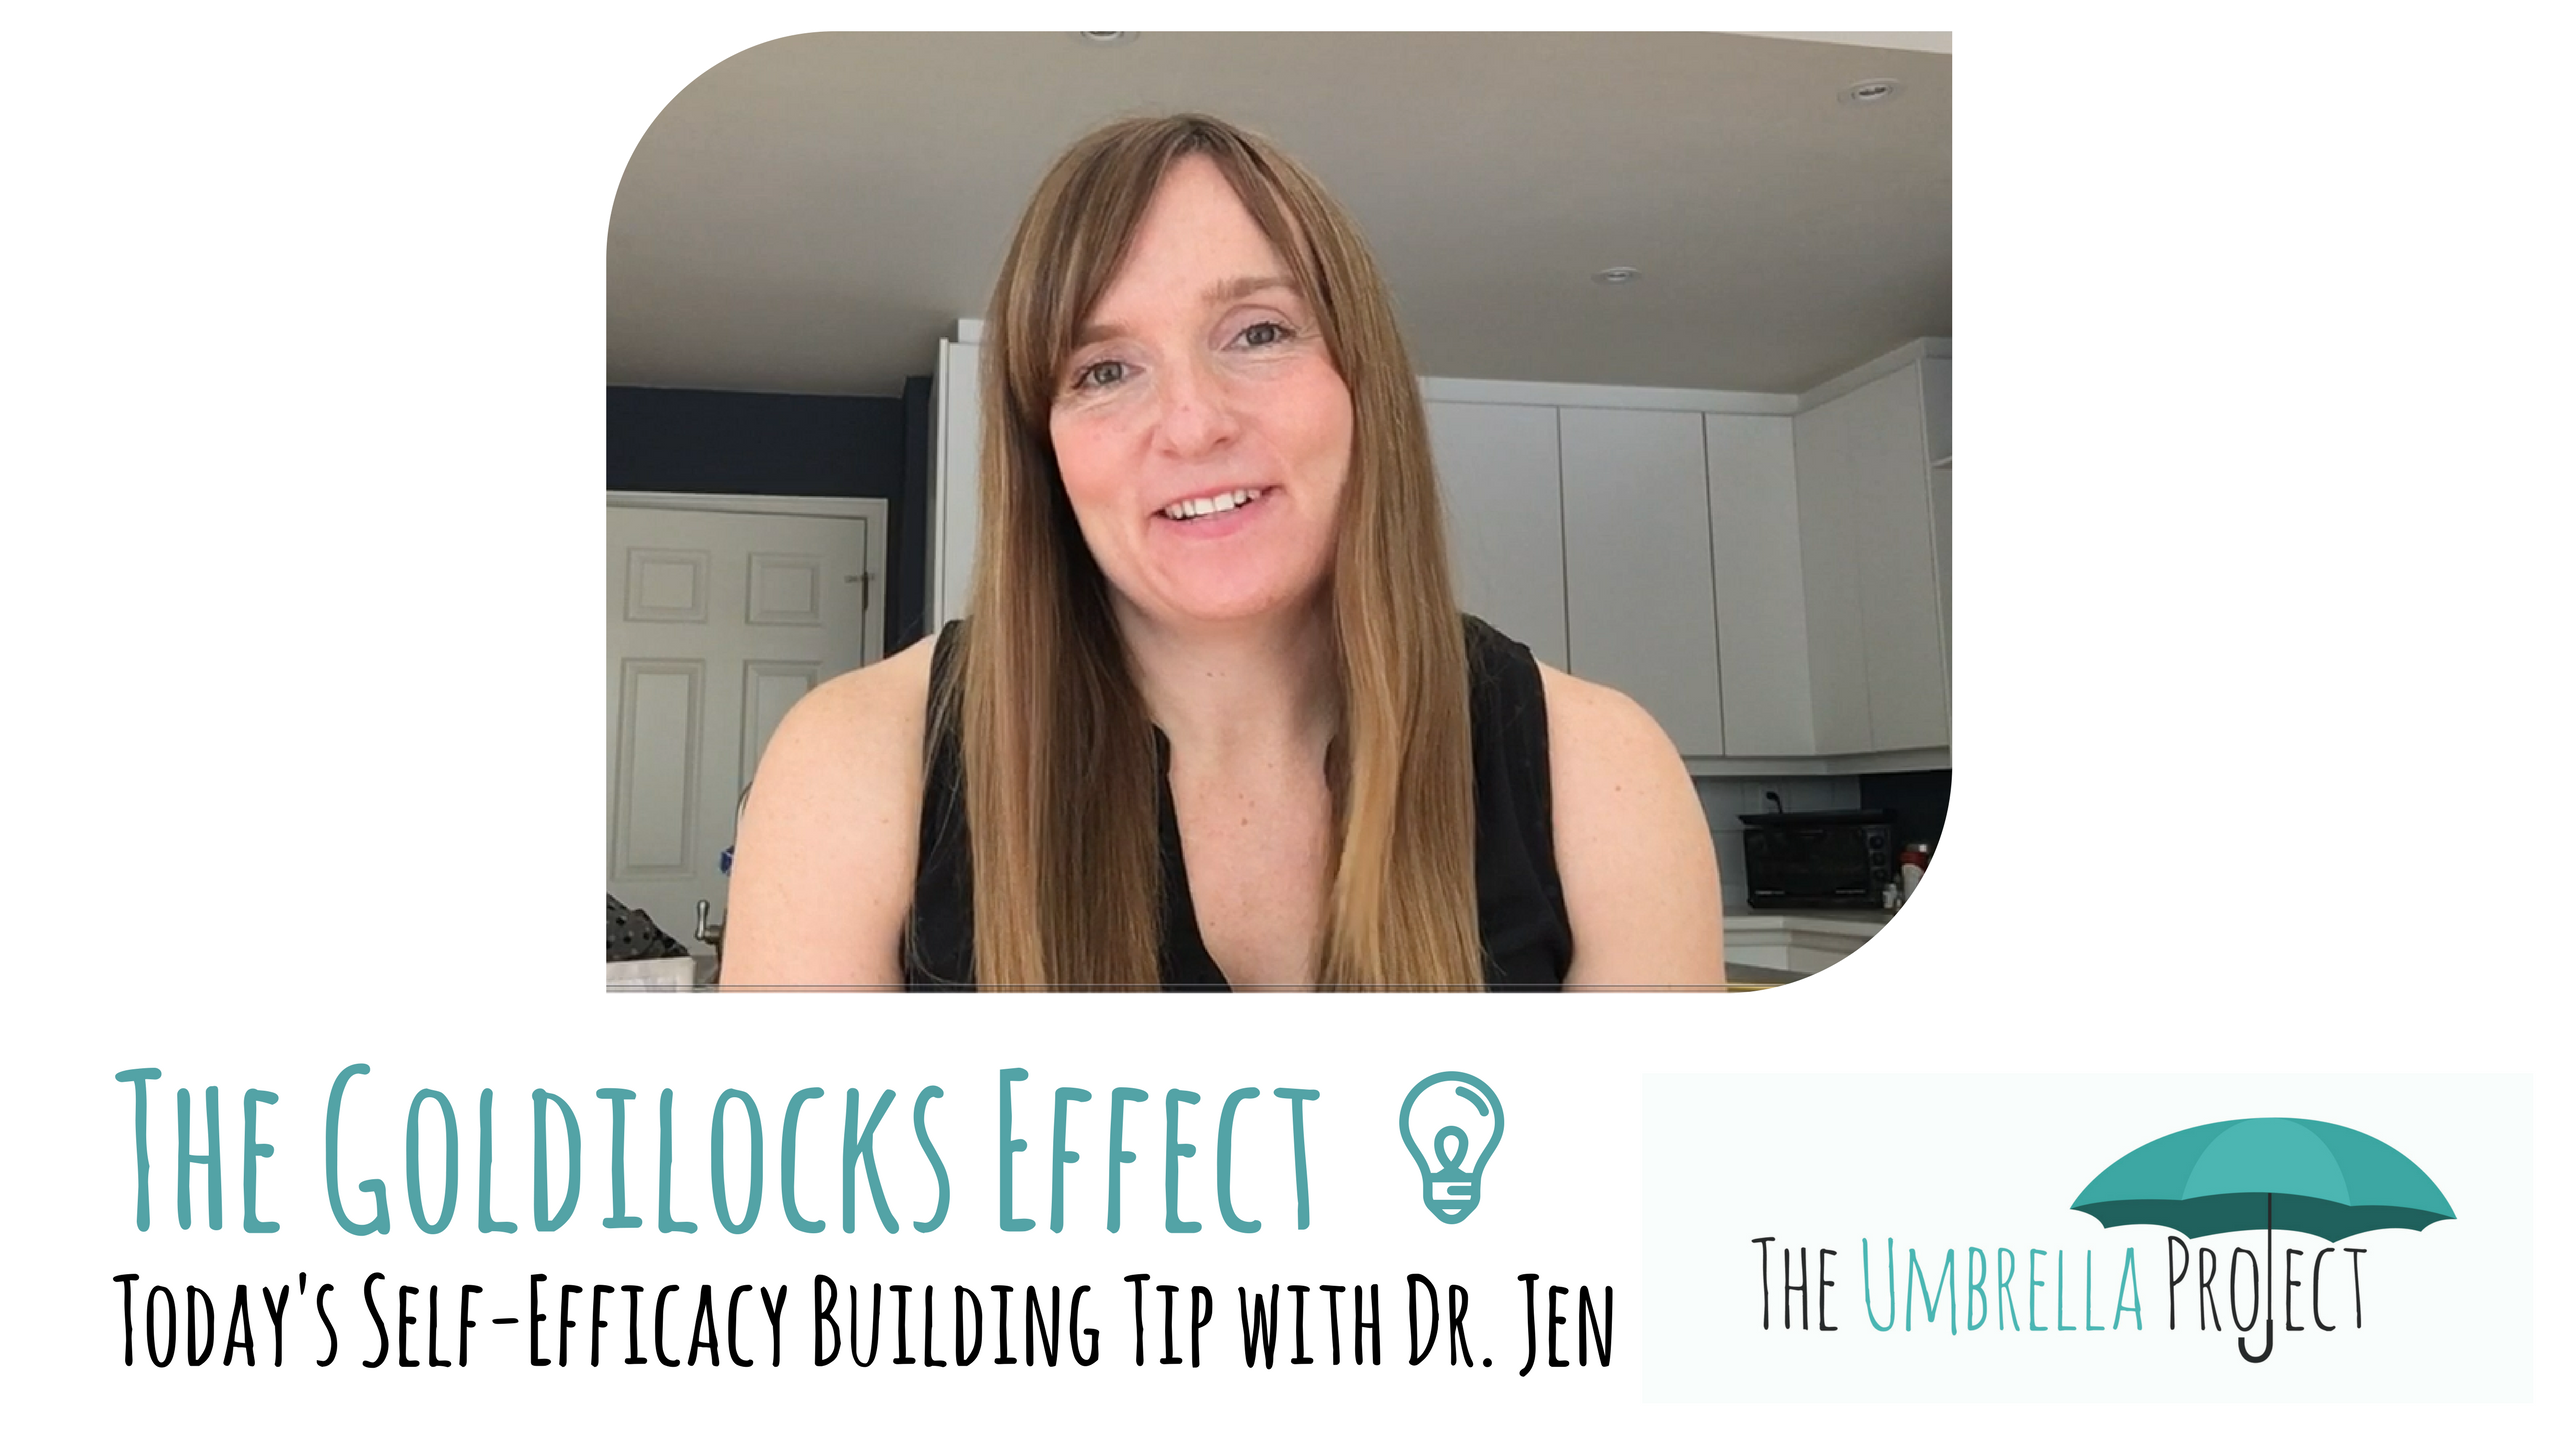 The Goldilocks Effect: Today’s Self-Efficacy Building Tip with Dr. Jen